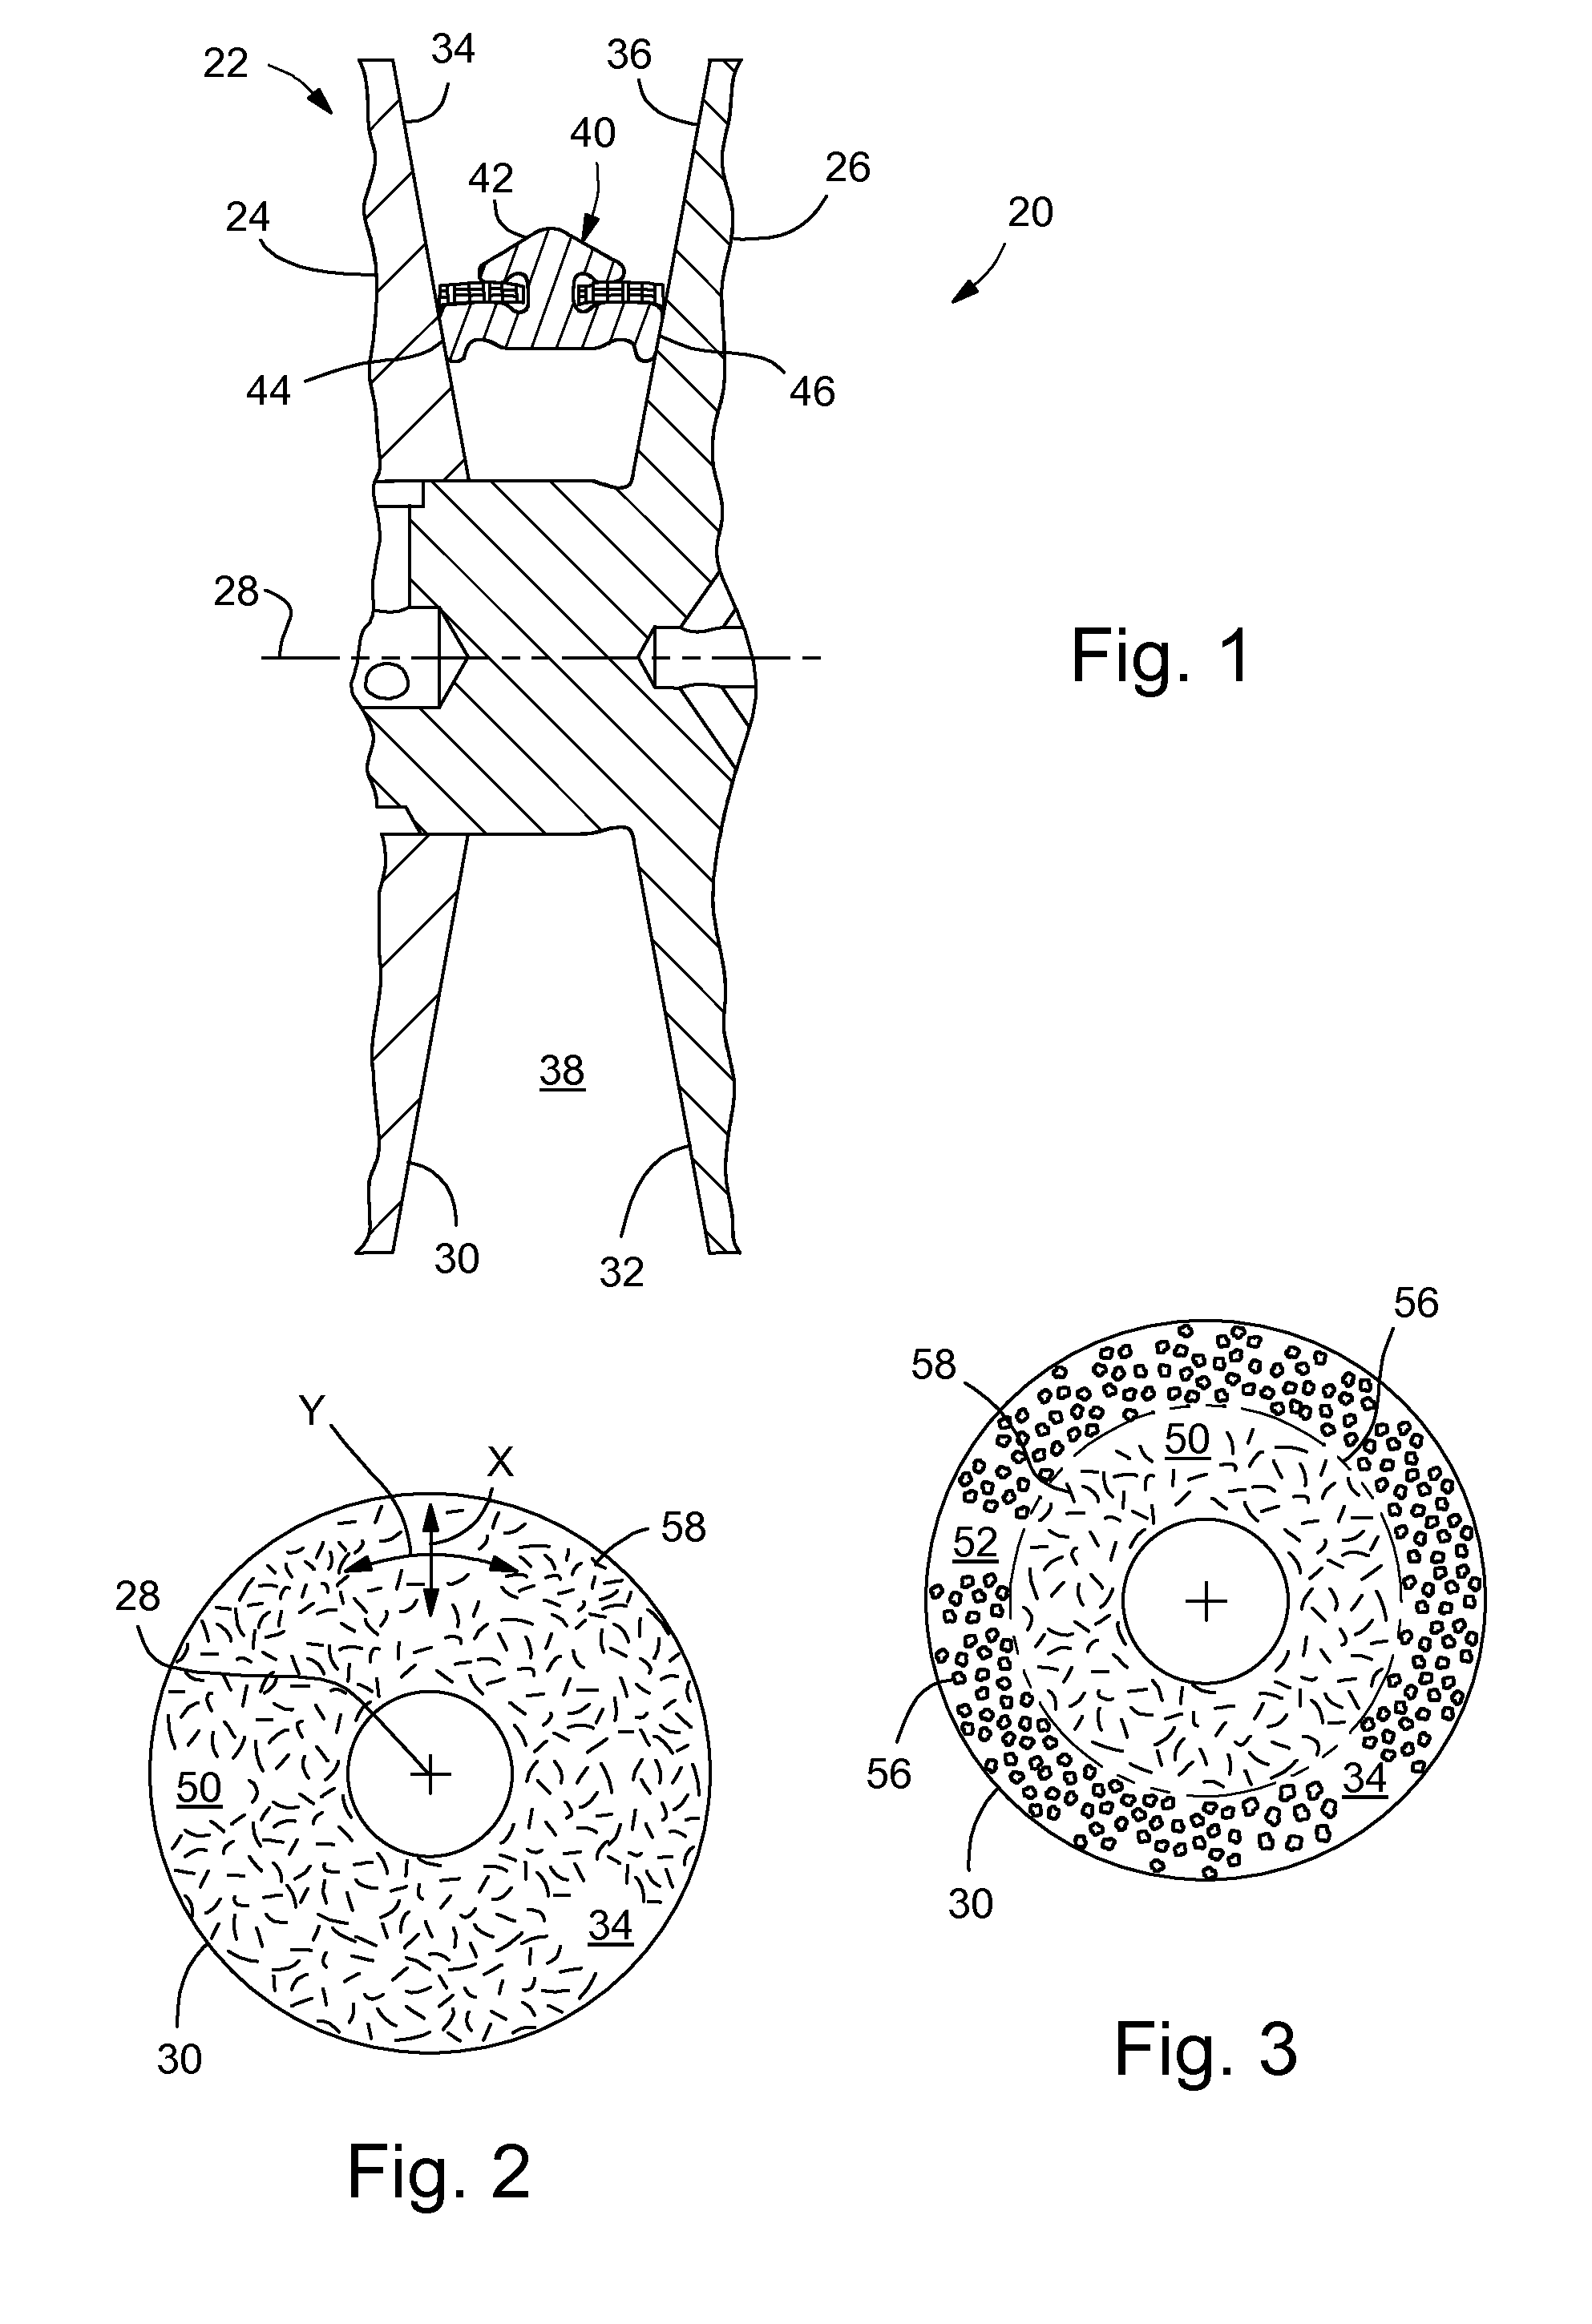 CVT Pulley With Engineered Surface